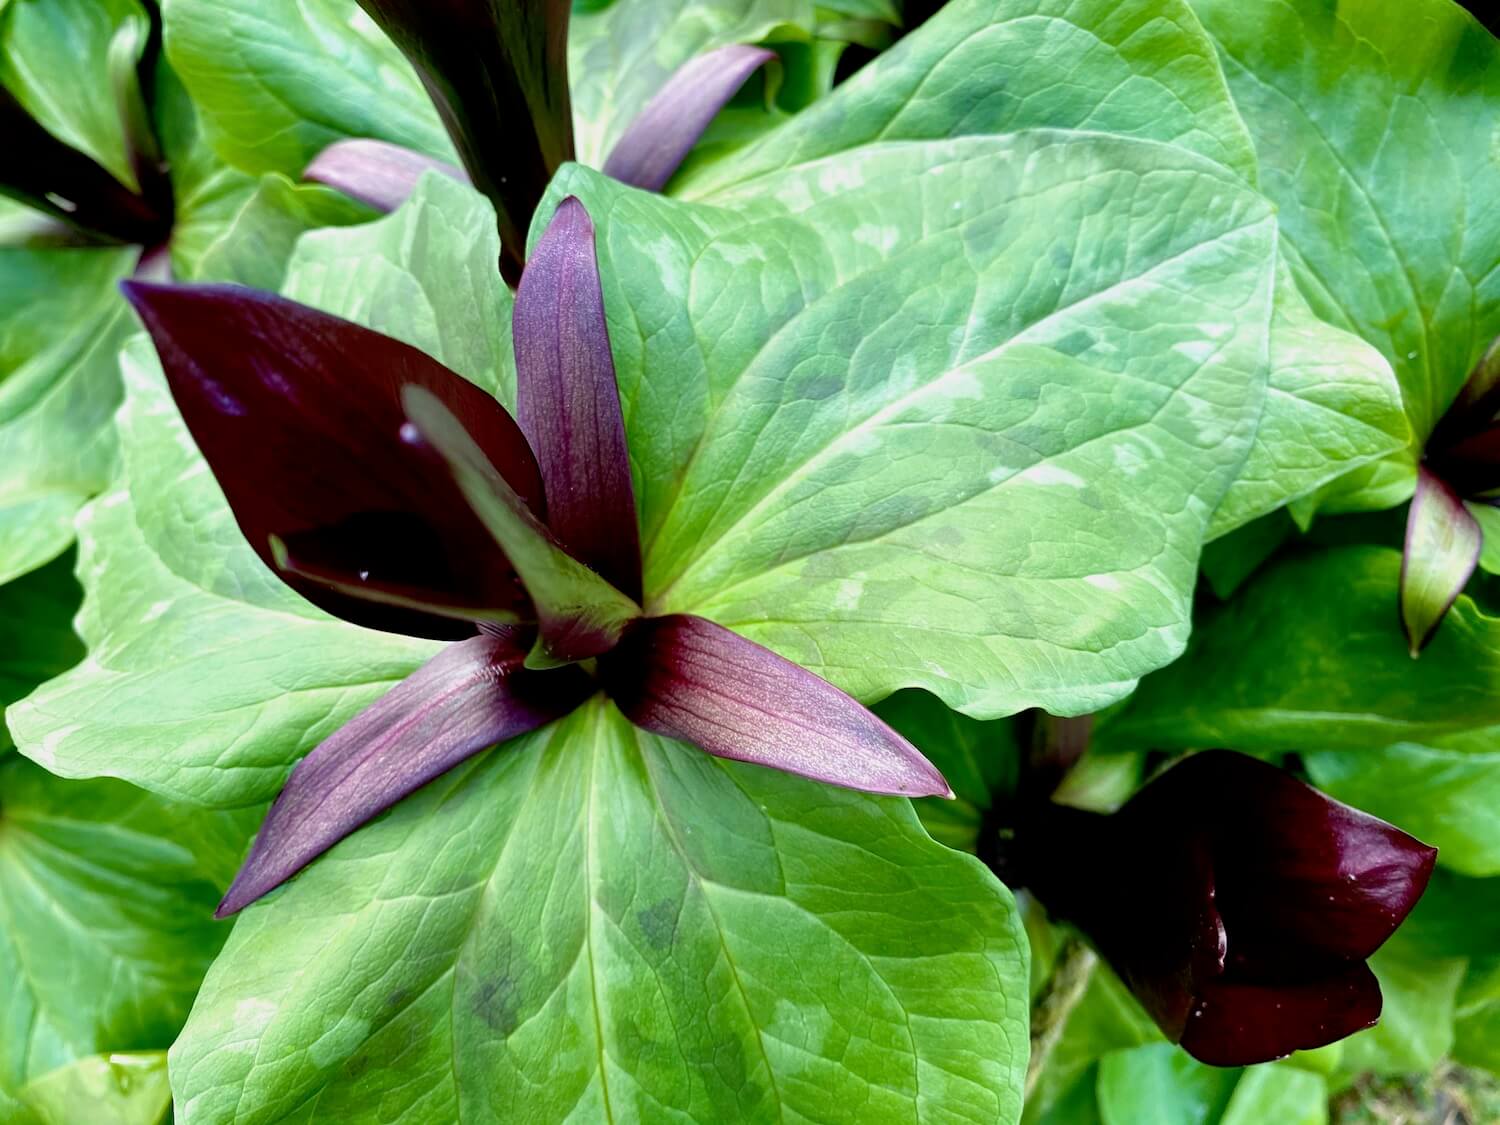 This ornate form of trillium comes to life with three variegated green triangular leaves for each rich purple four petaled blossom. The plant feels hearty in an elegant way.